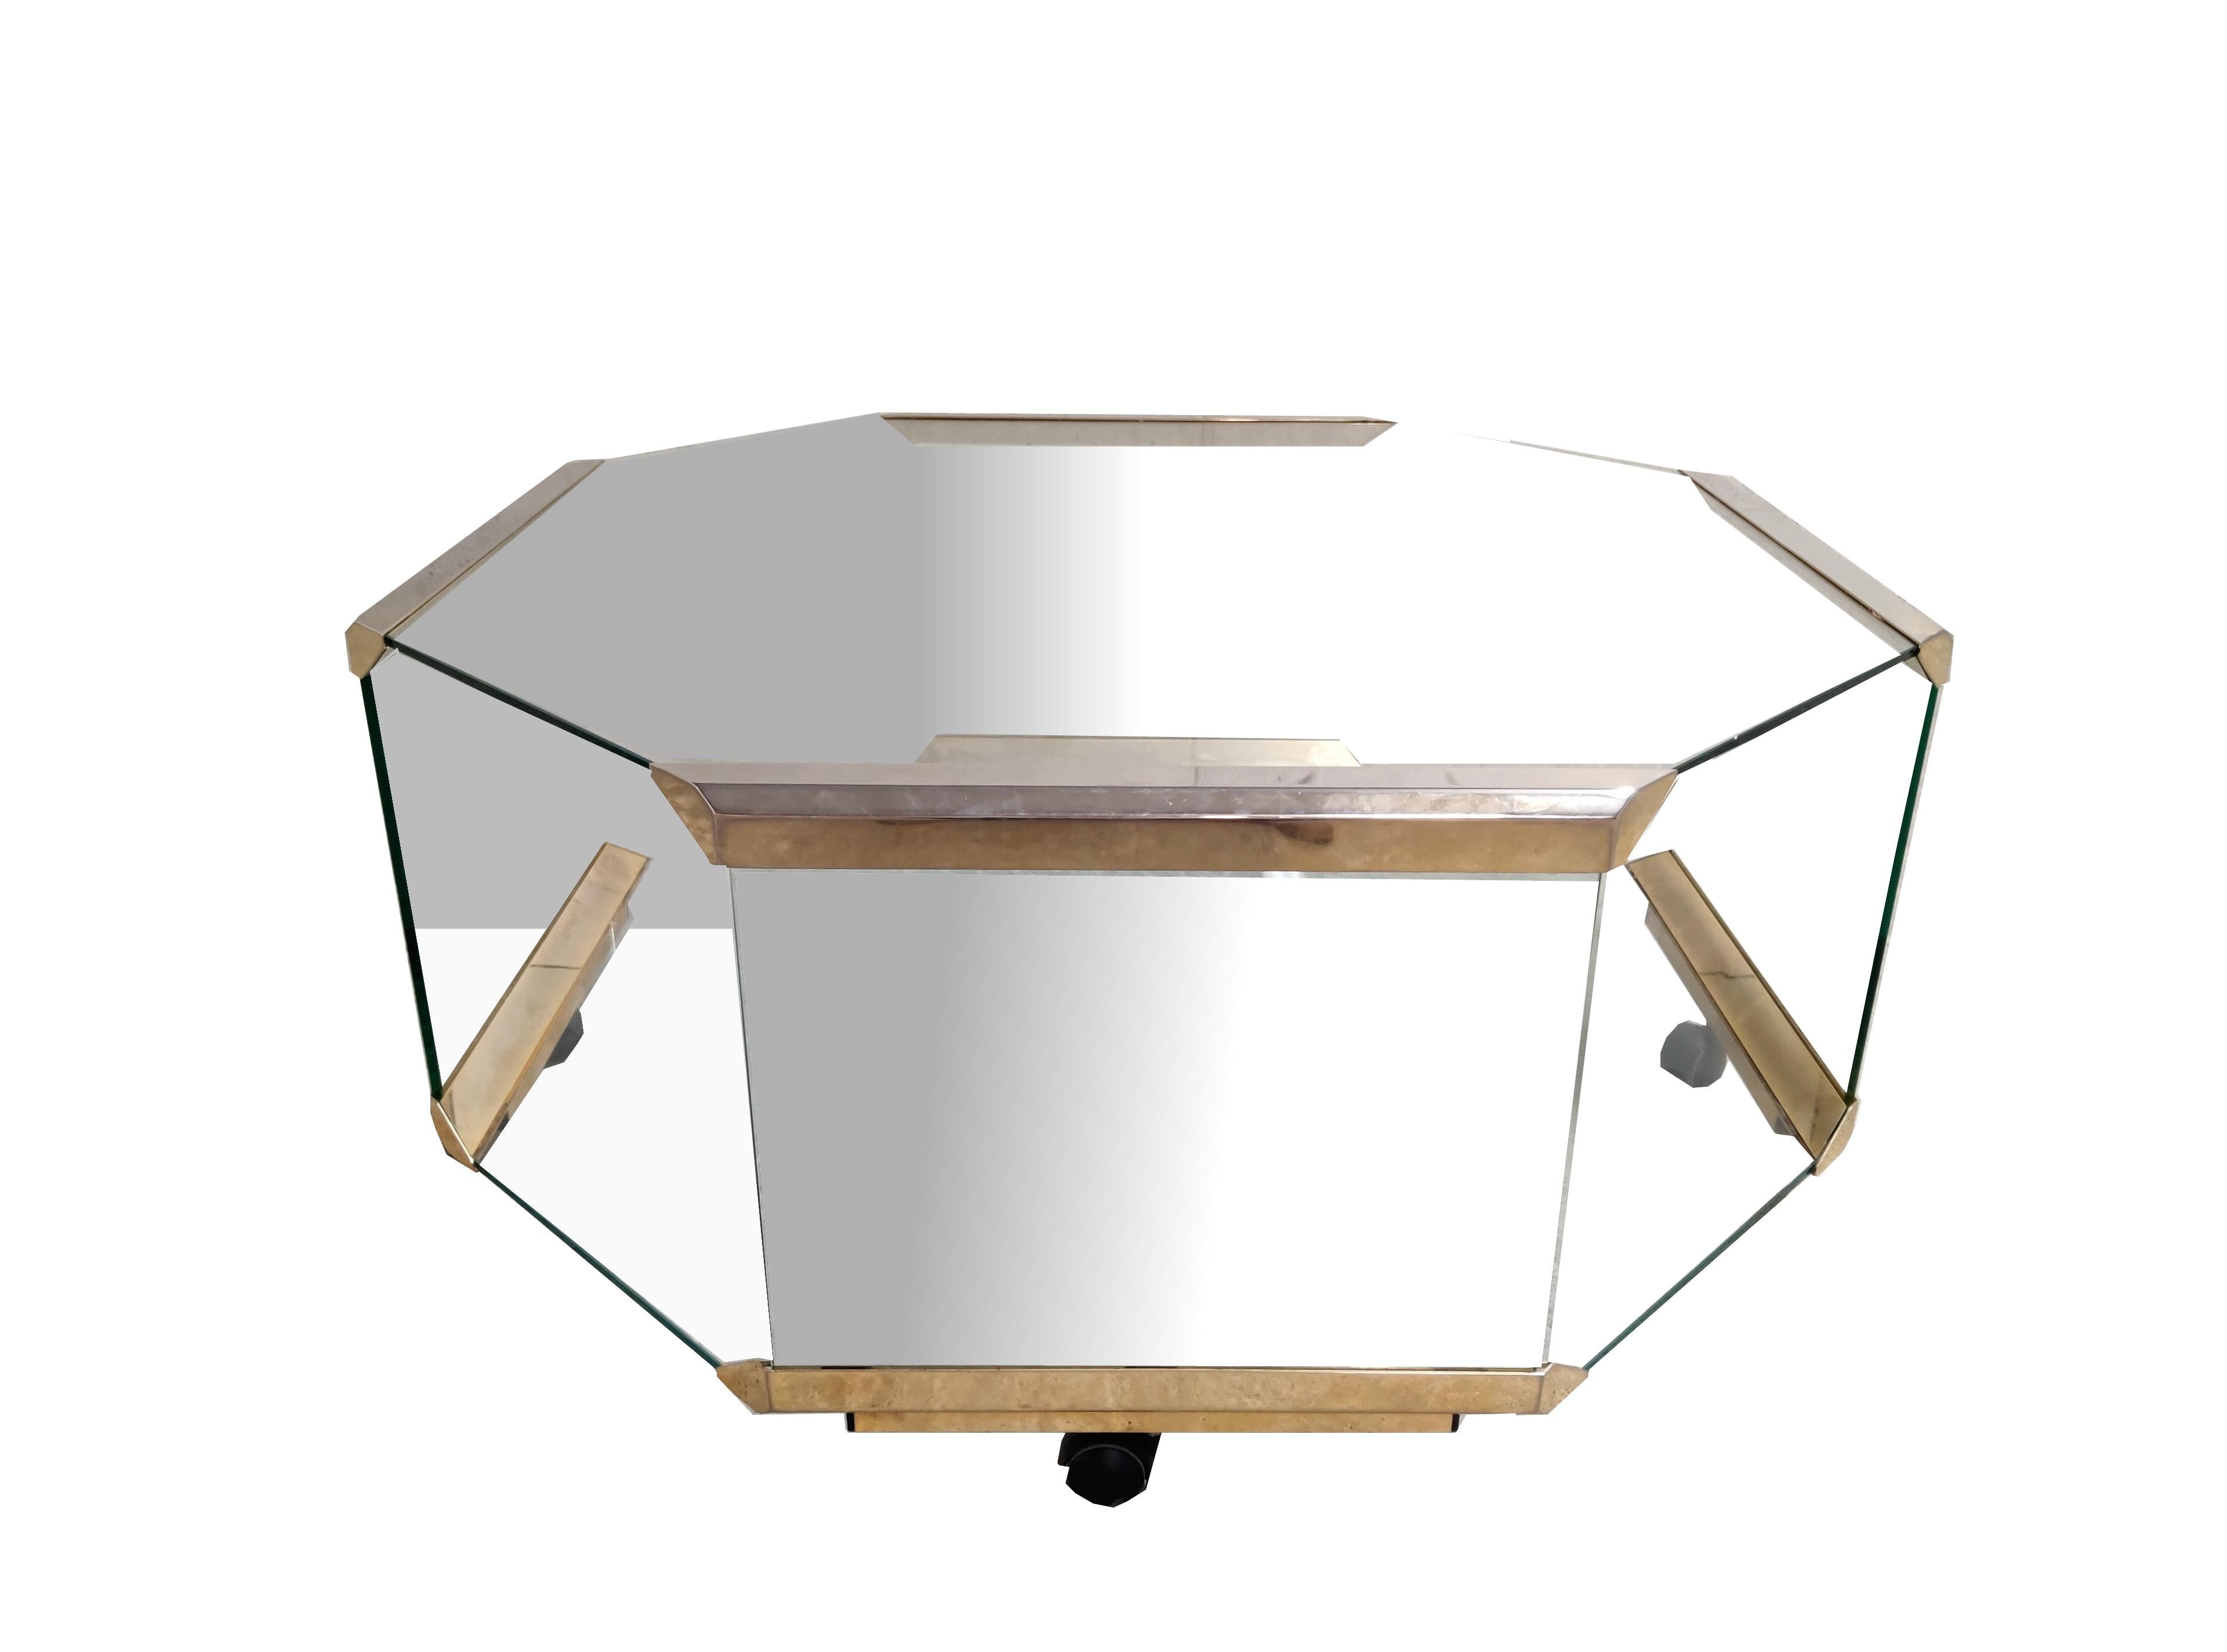 Lovely glass and brass coffee table on wheels.

Manufactured by Galotti & Radice.

Ideal display coffee table.

Good condition, slight fading of the brass on some spots.

1980s, Italy

Dimensions:

Height 45 cm/17.71